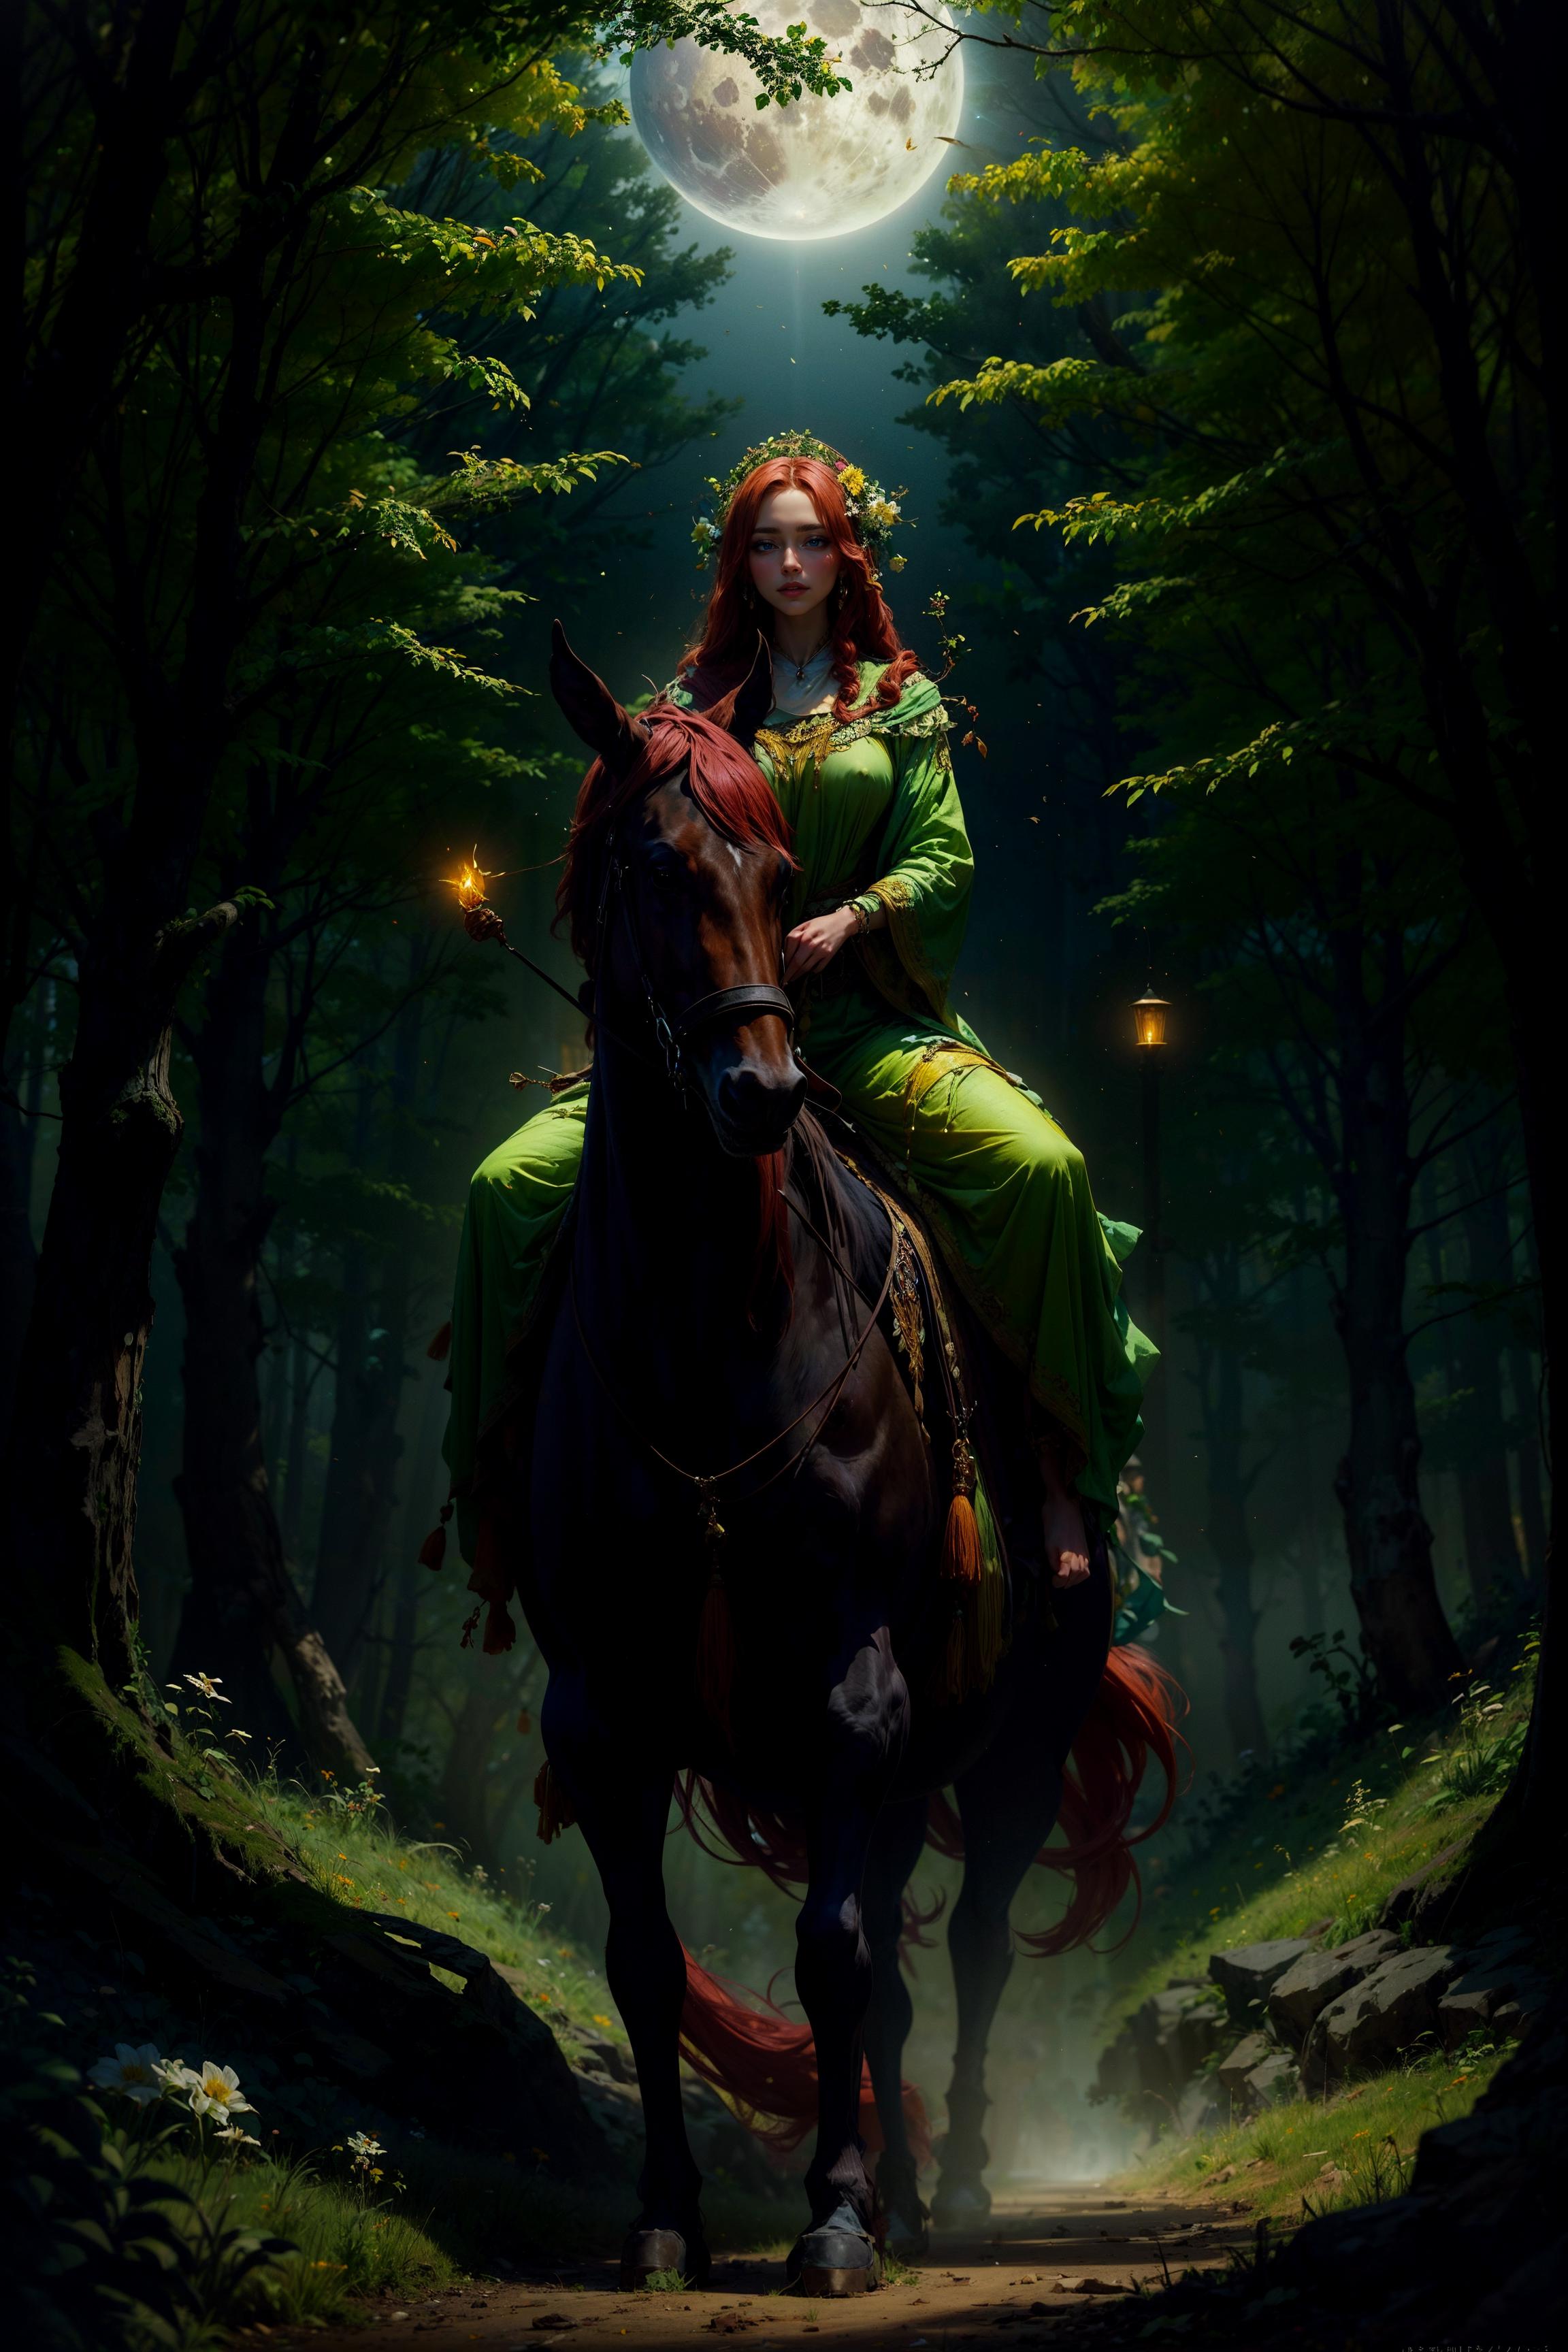 A woman in green riding a horse through a forest.